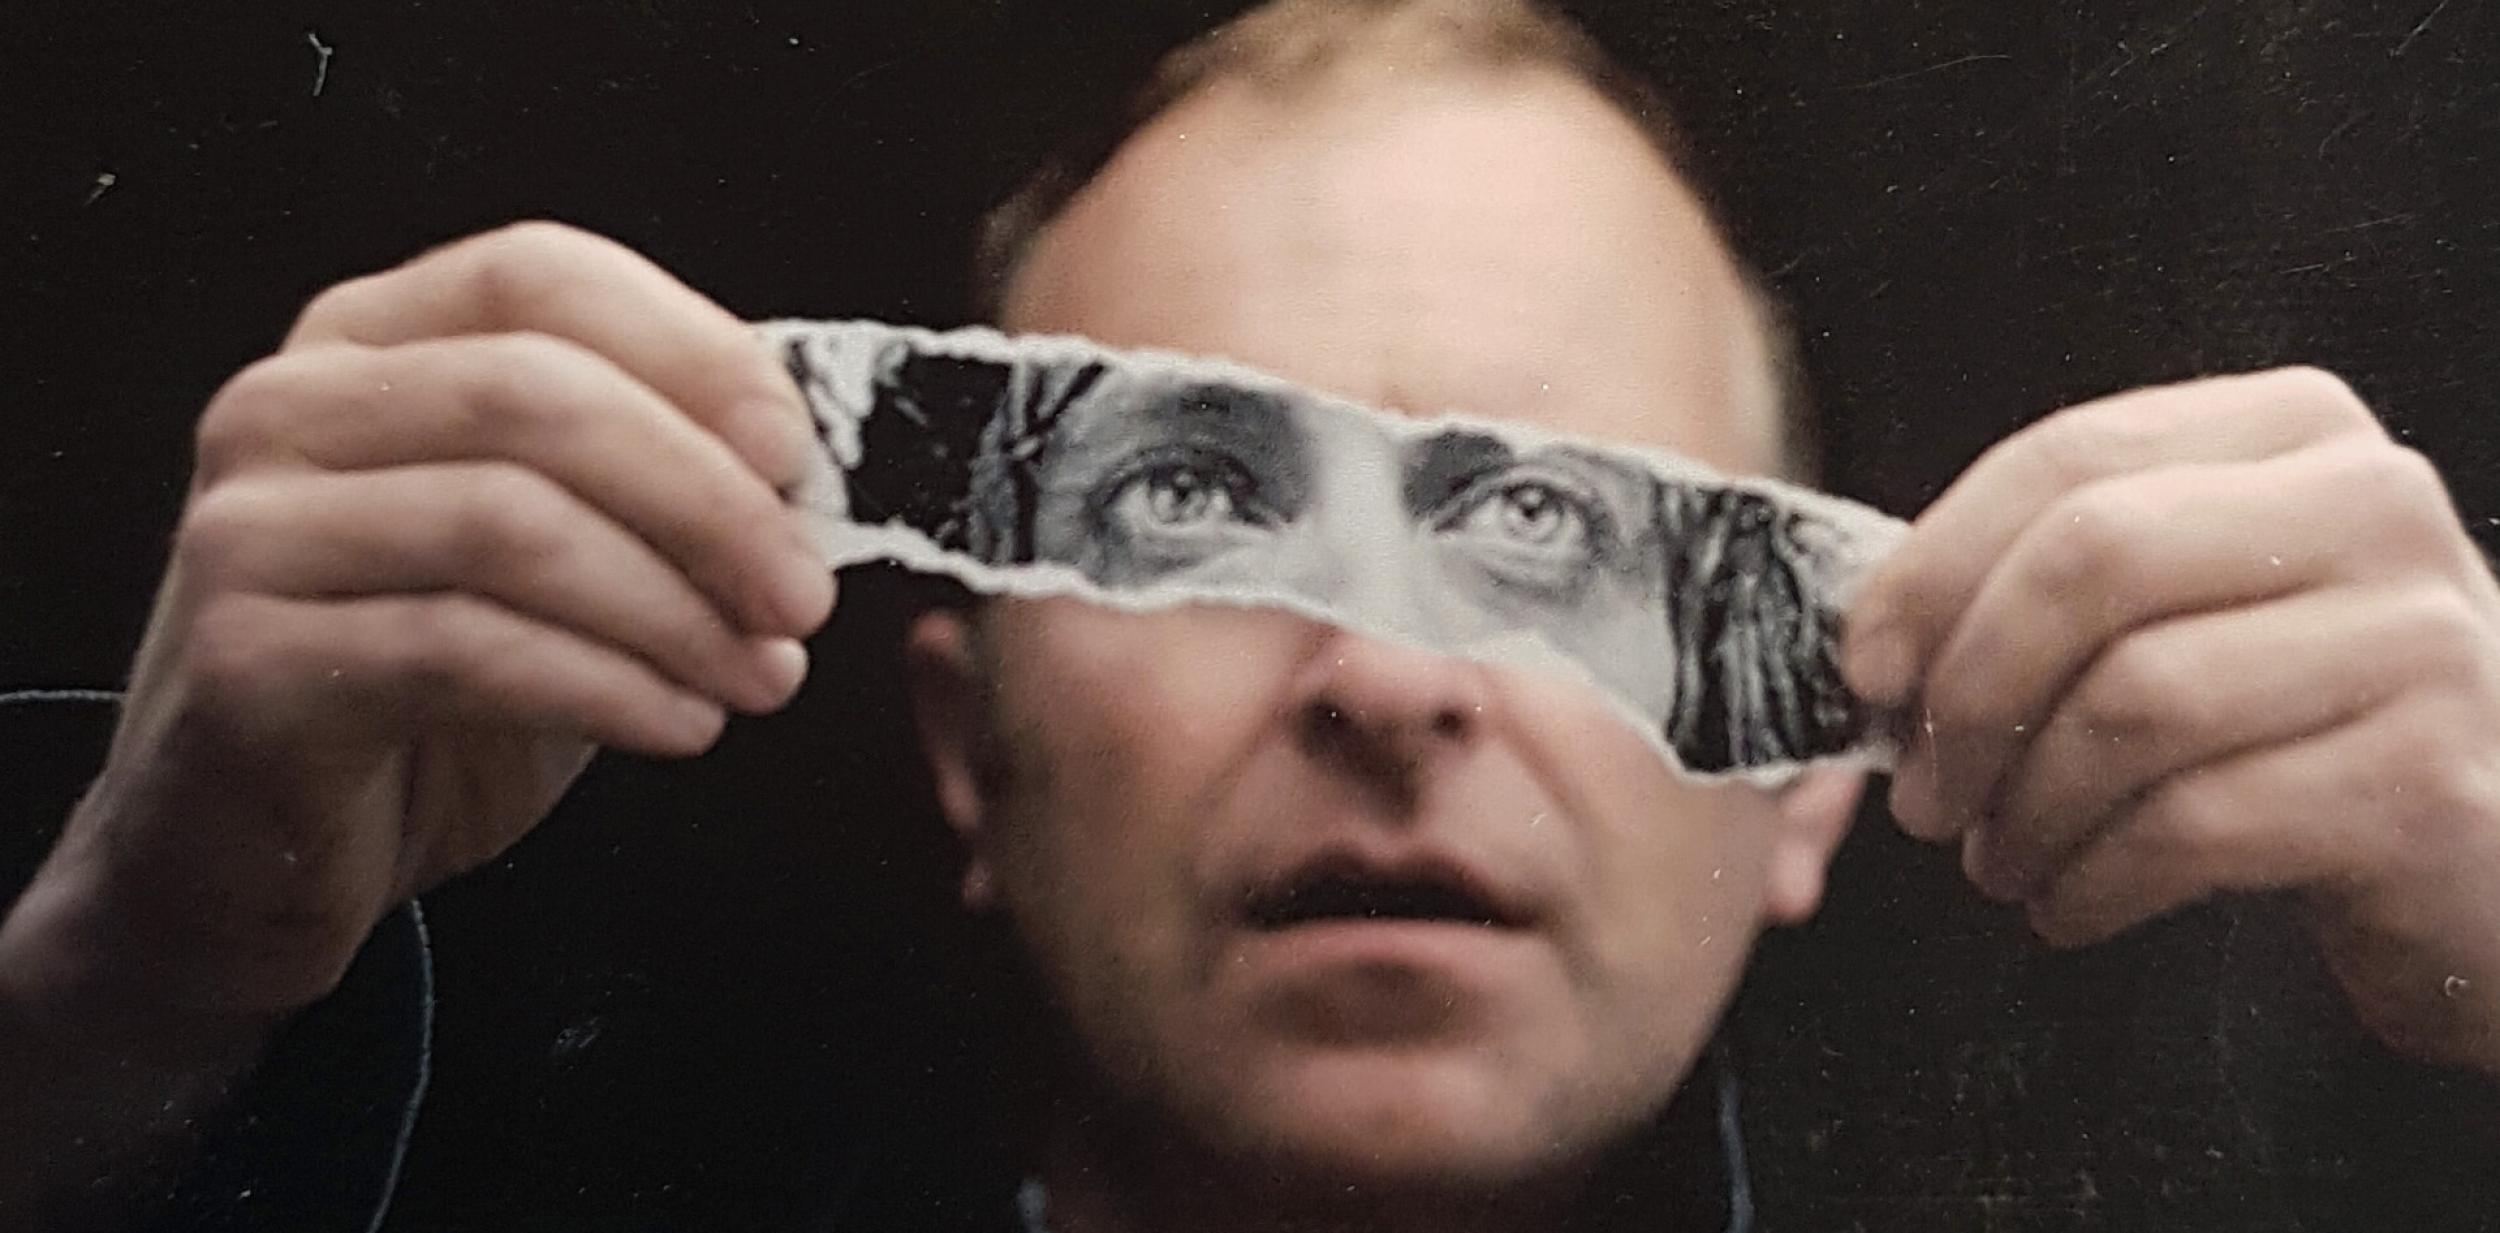 Man holding a strip of a photo over his eyes